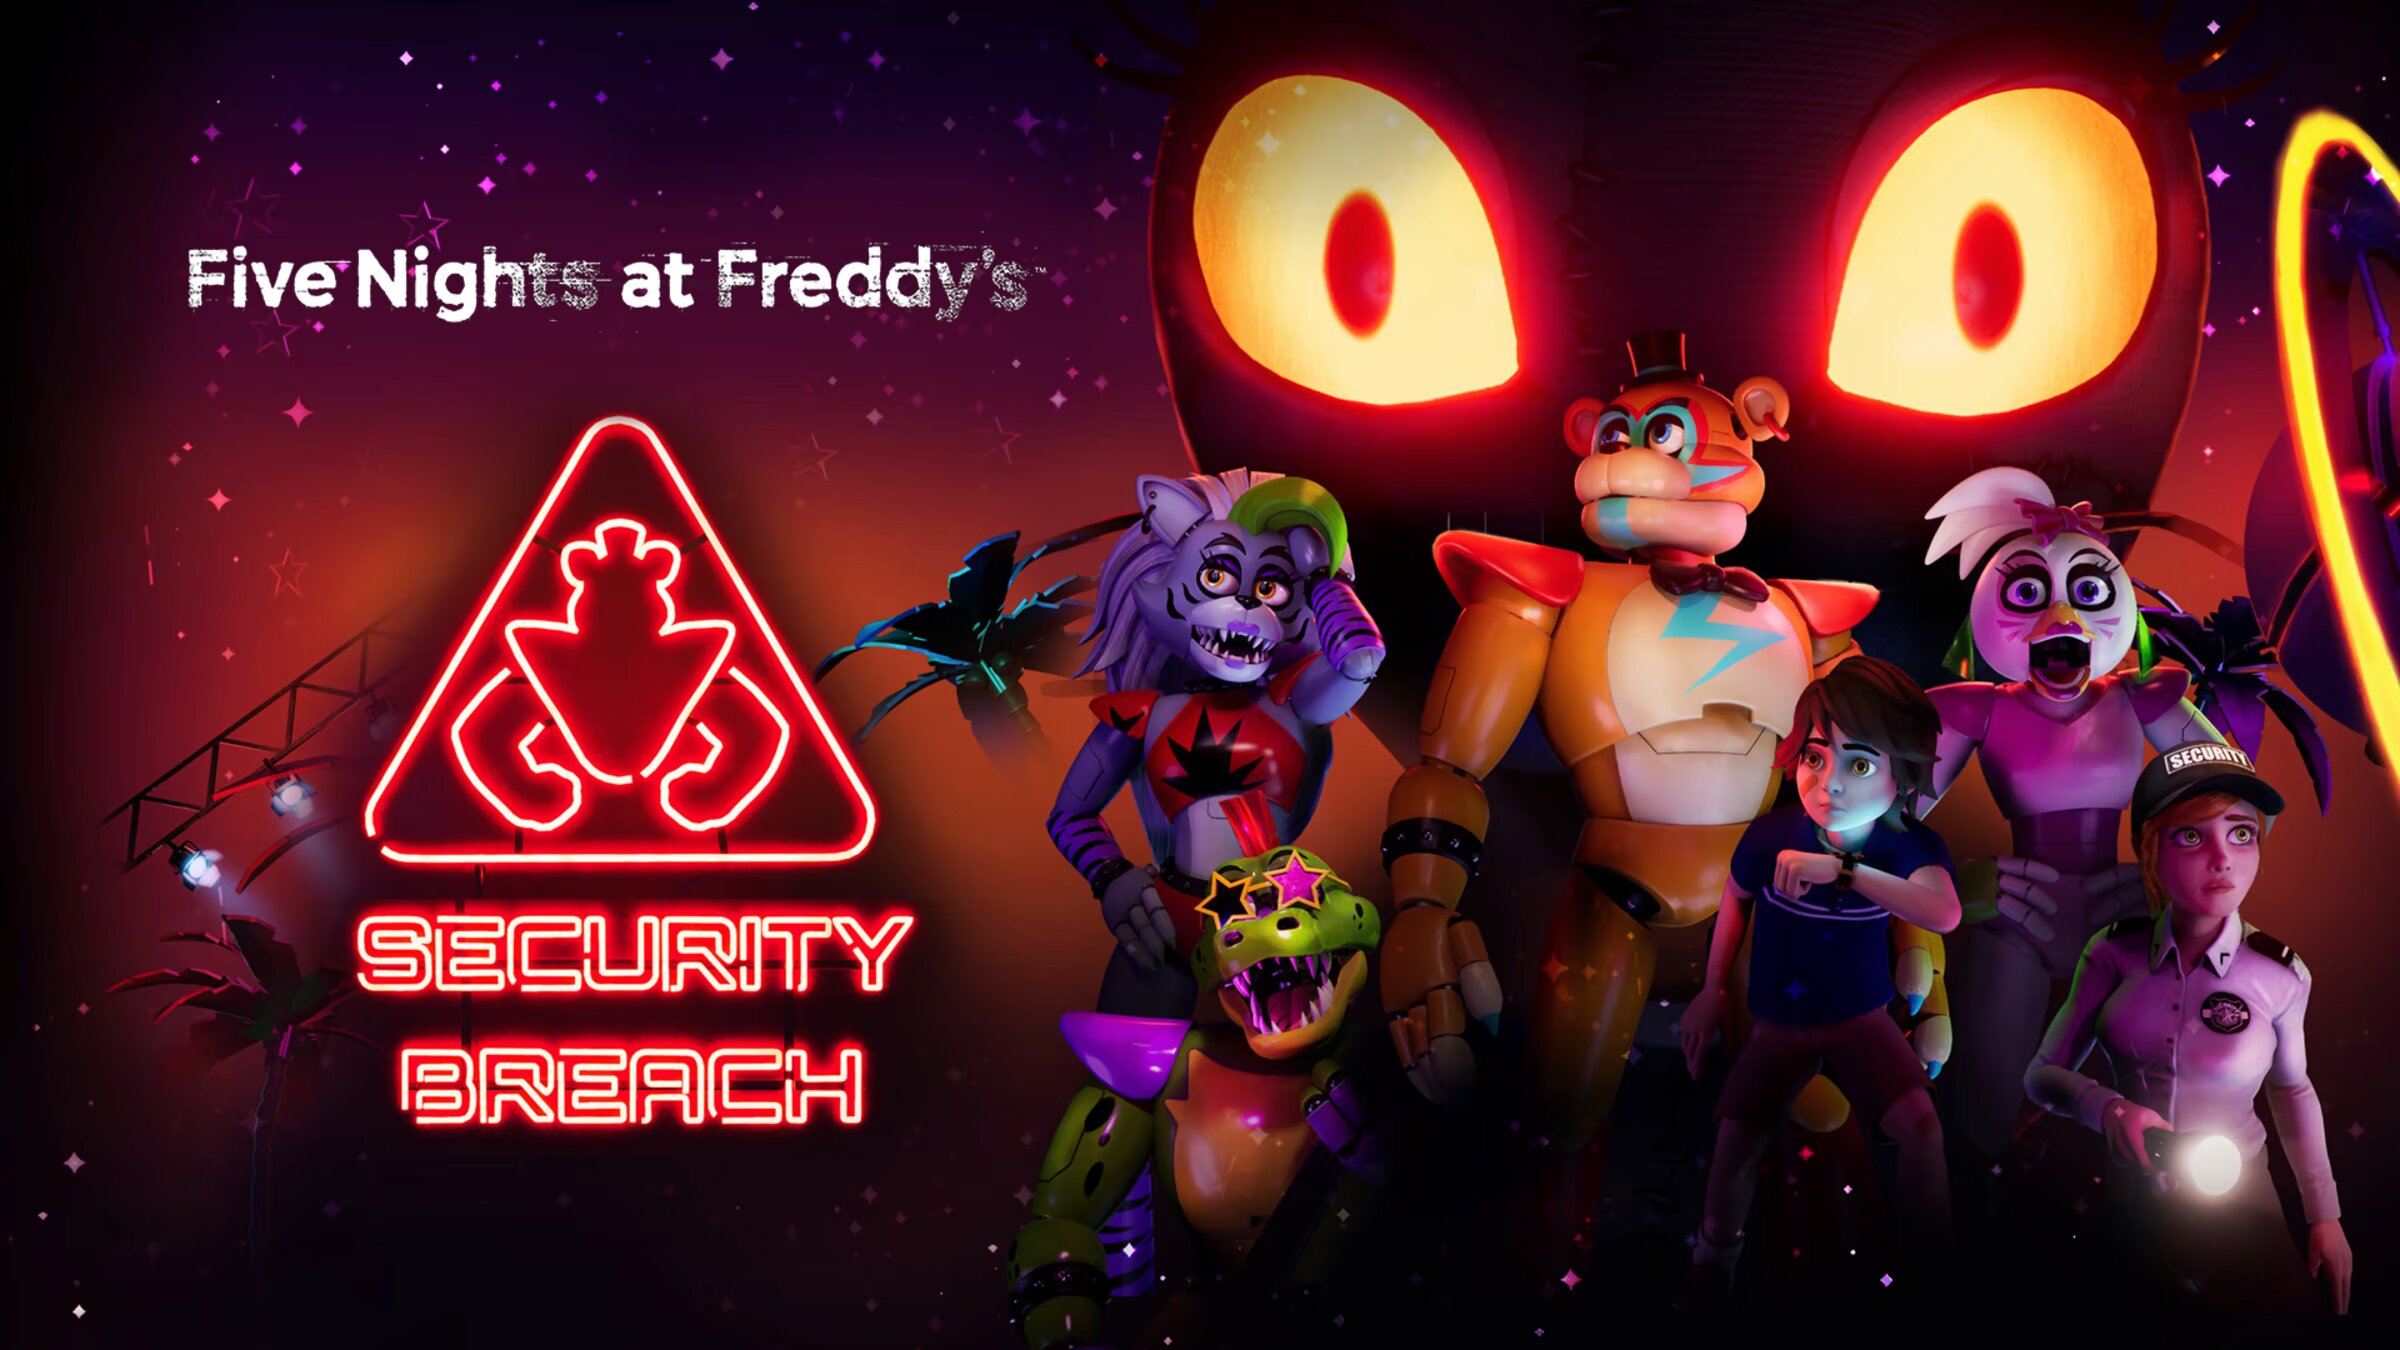 Download Five Nights at Freddy's: Security Breach